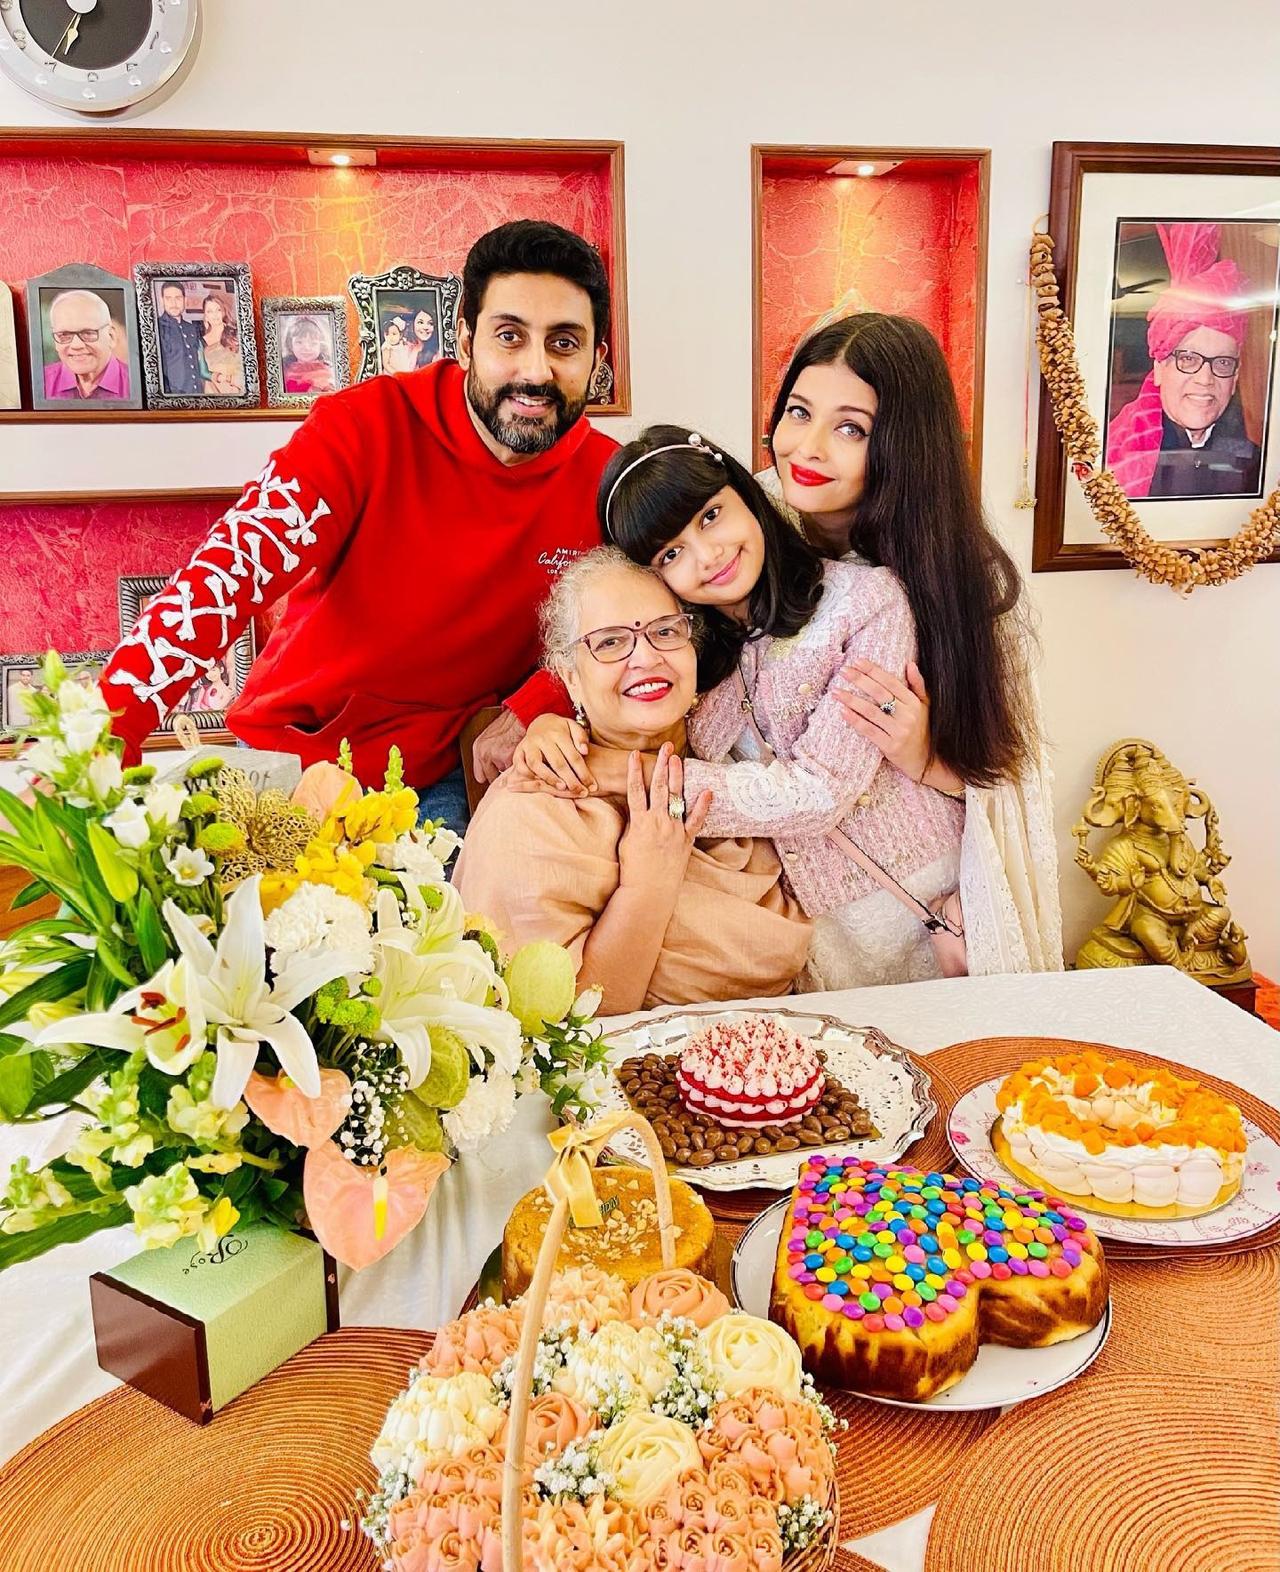 Last year on this day, the actress shared another adorbale picture on her mother's birthday. She had the company of three delicious cakes, her daughter, and her husband Abhishek Bachchan. 